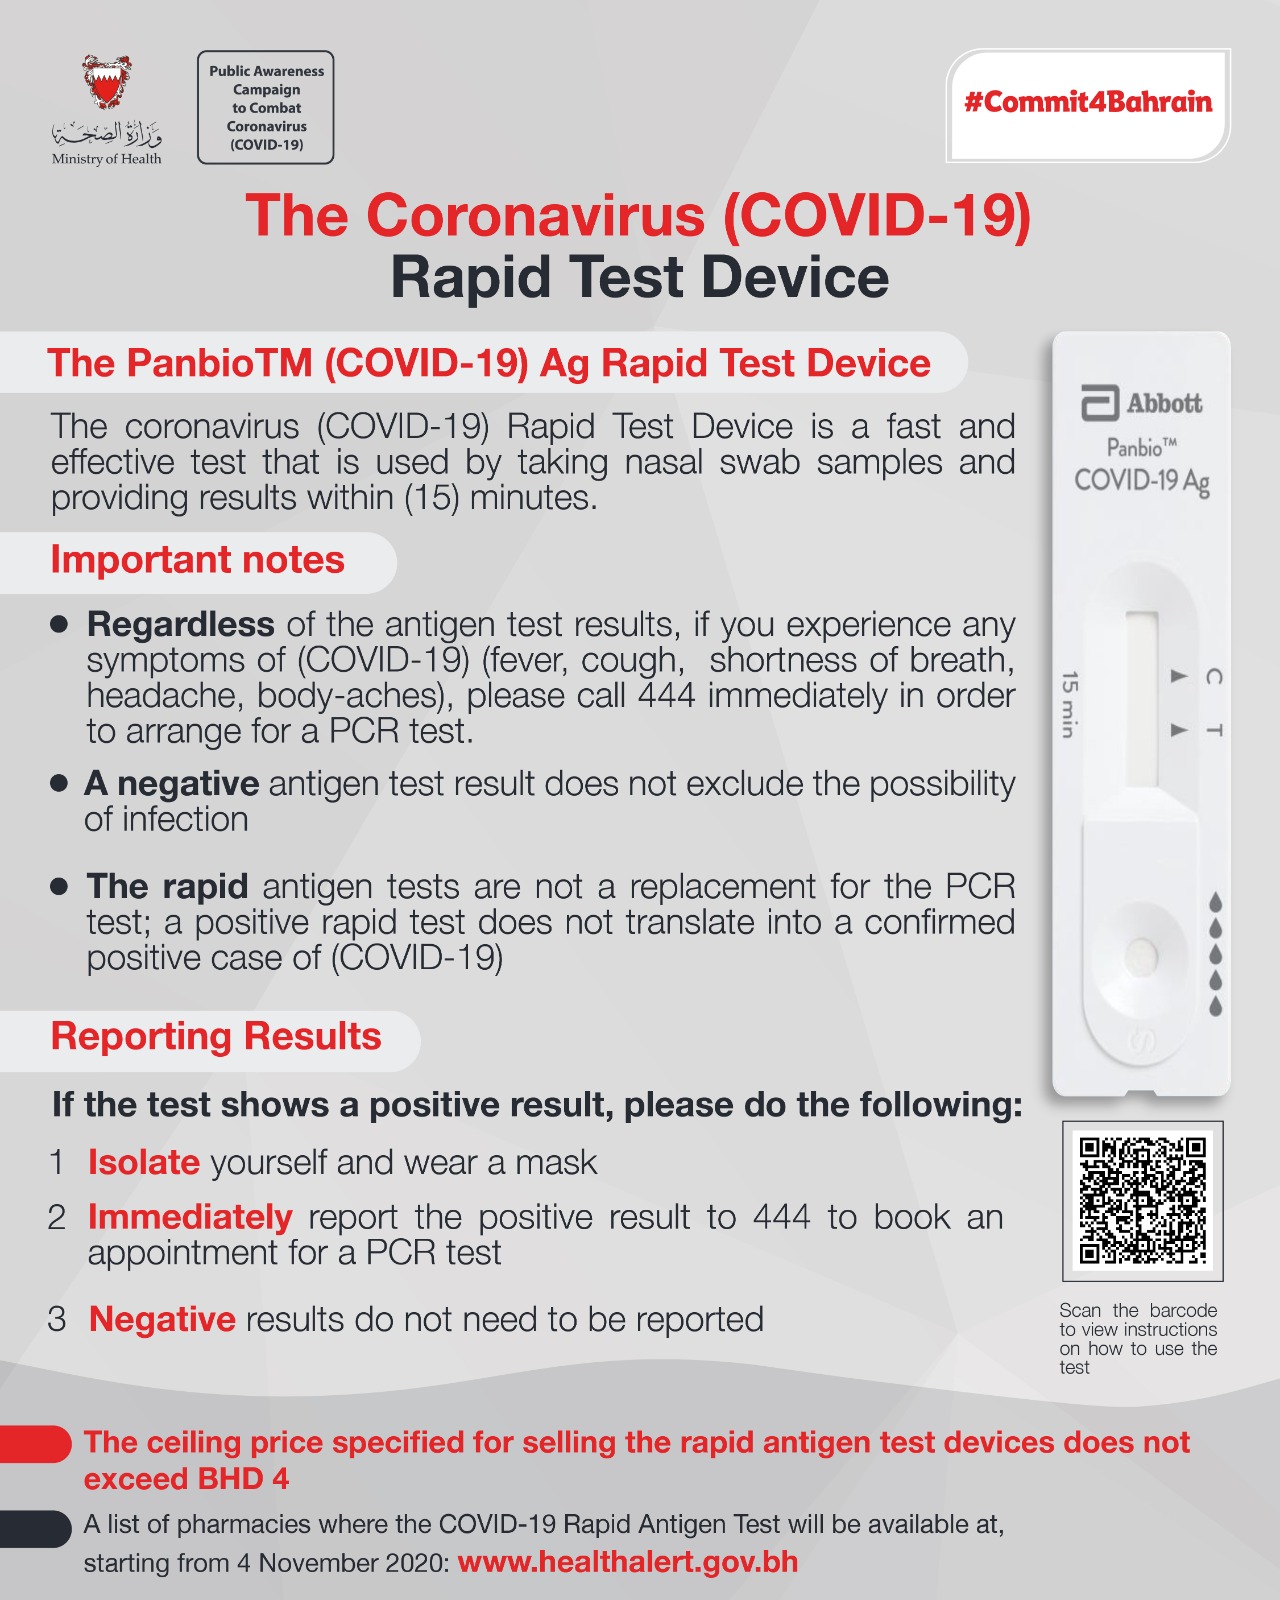 MOH announces the availability of the COVID-19 rapid antigen test in pharmacies across the Kingdom: 03 November 2020